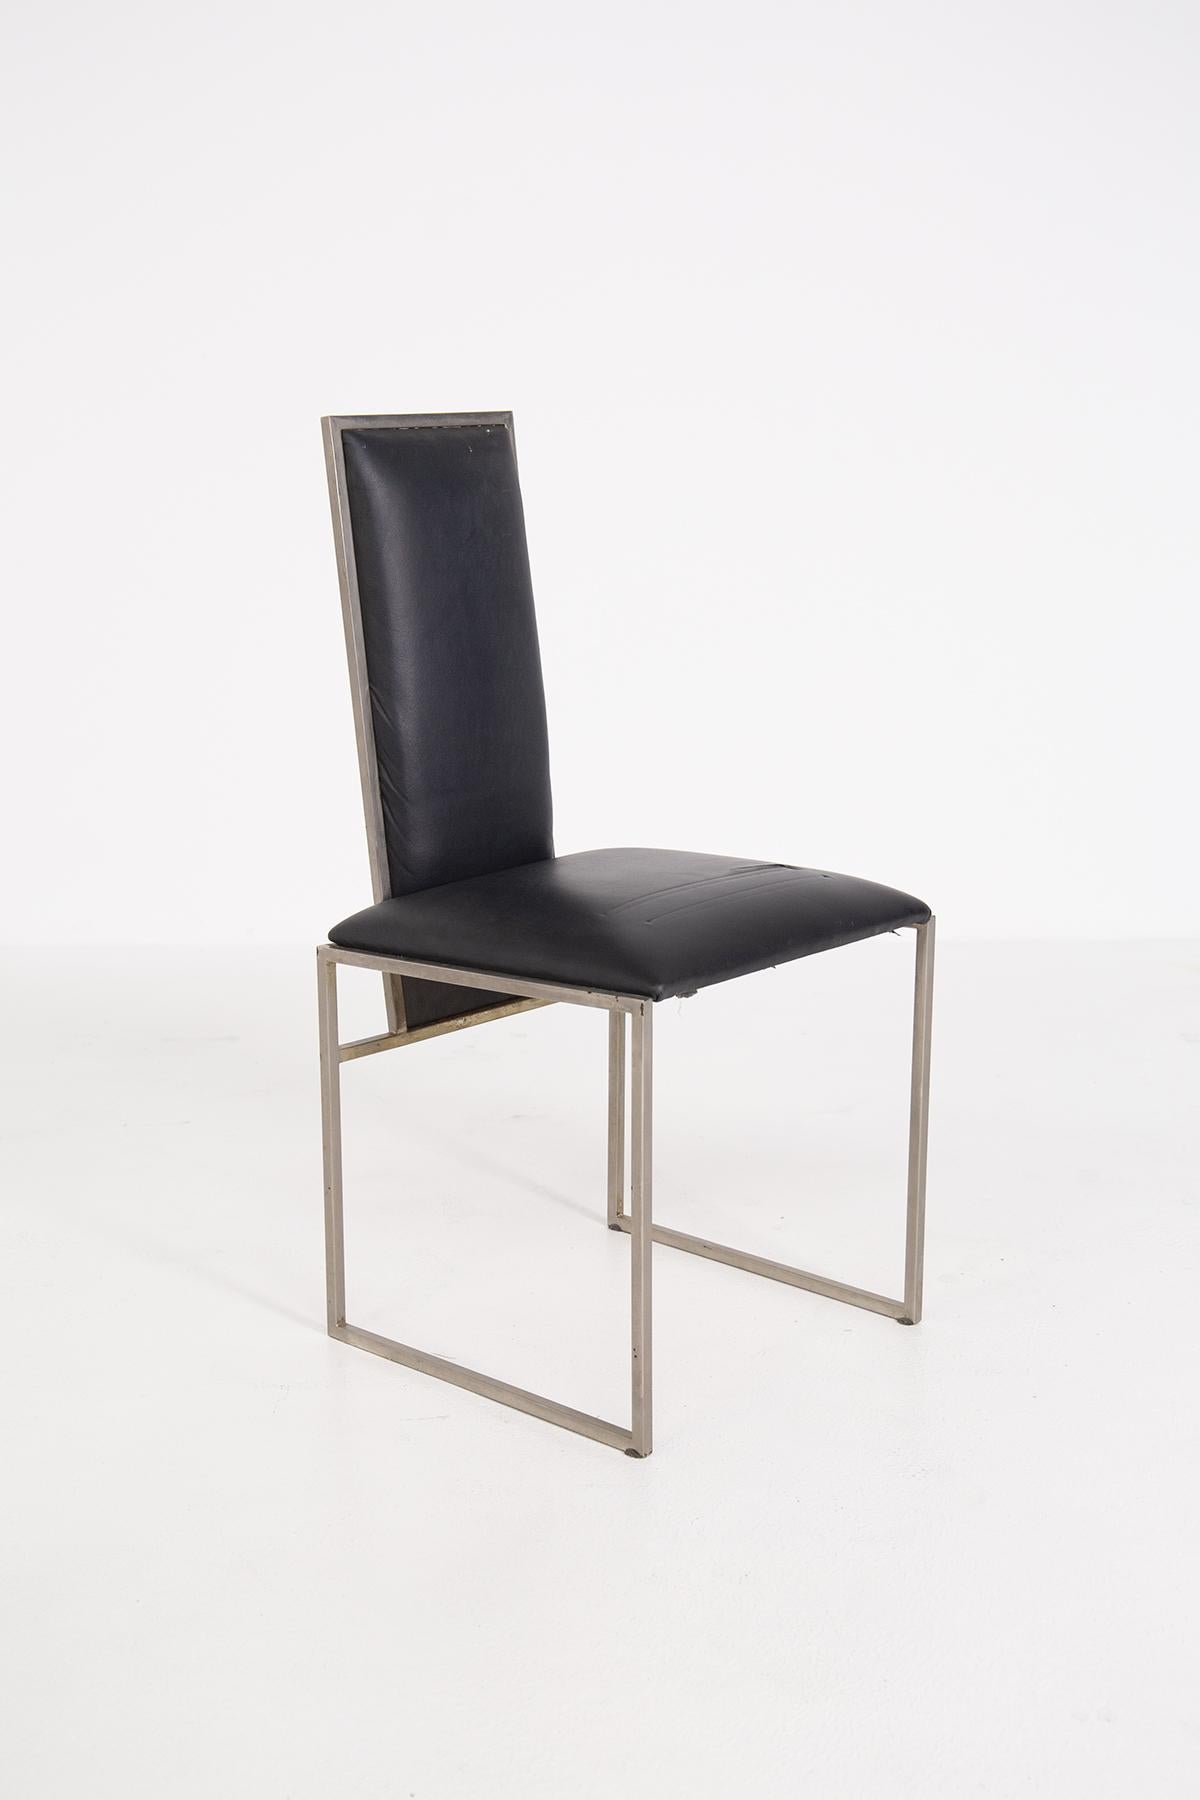 Late 20th Century Romeo Rega Set of Six Dining Chair in Black Leather and Steel